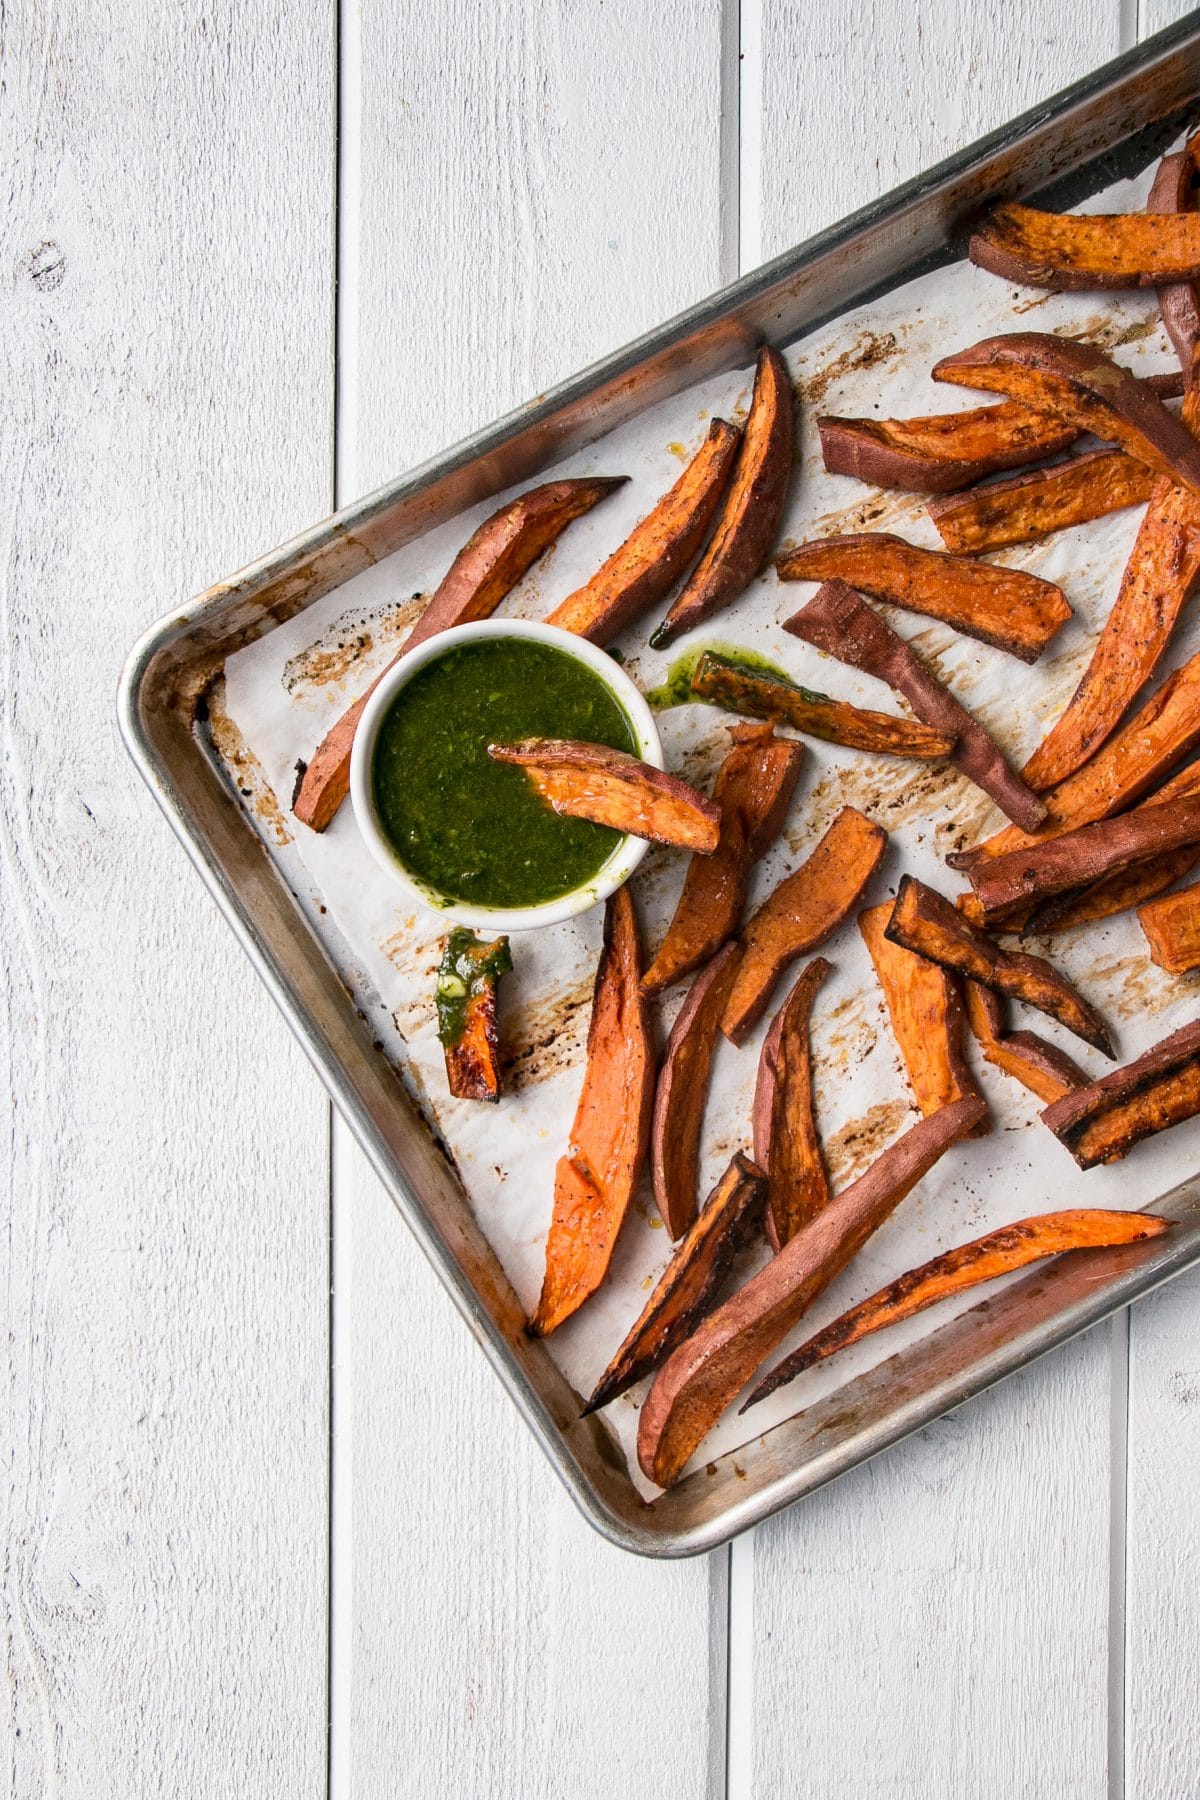 Roasted Sweet Potatoes with Chimichurri is a vibrant and delicious side dish! Super healthy with baked sweet potato fries and herb packed chimichurri sauce. #healthy #sweetpotatoes #fries #chimichurri